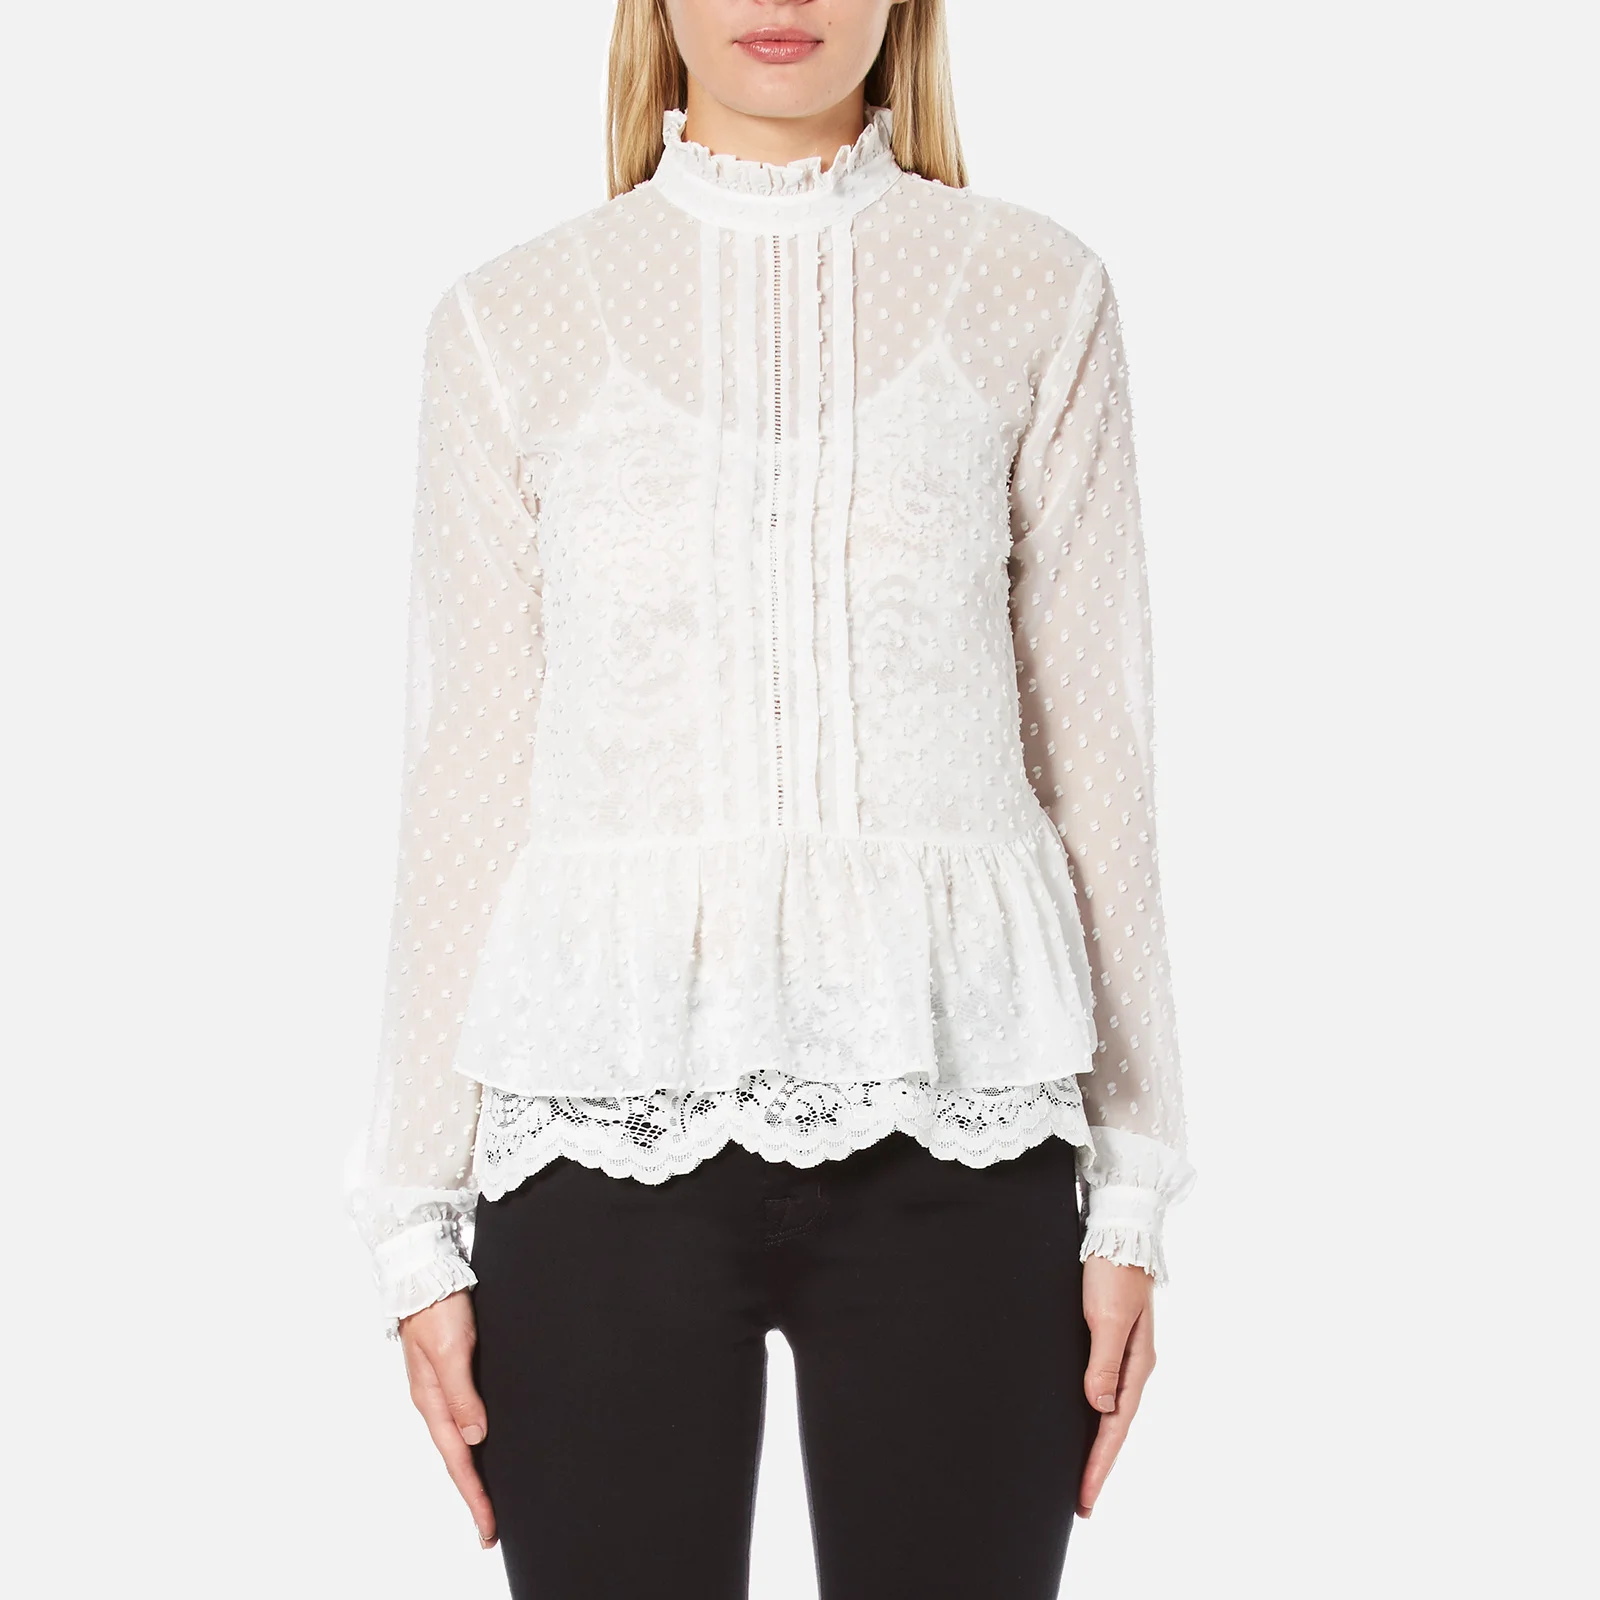 Perseverance Women's Victoriana Dobby Chiffon Blouse with Lace Cami Lining - Off White Image 1